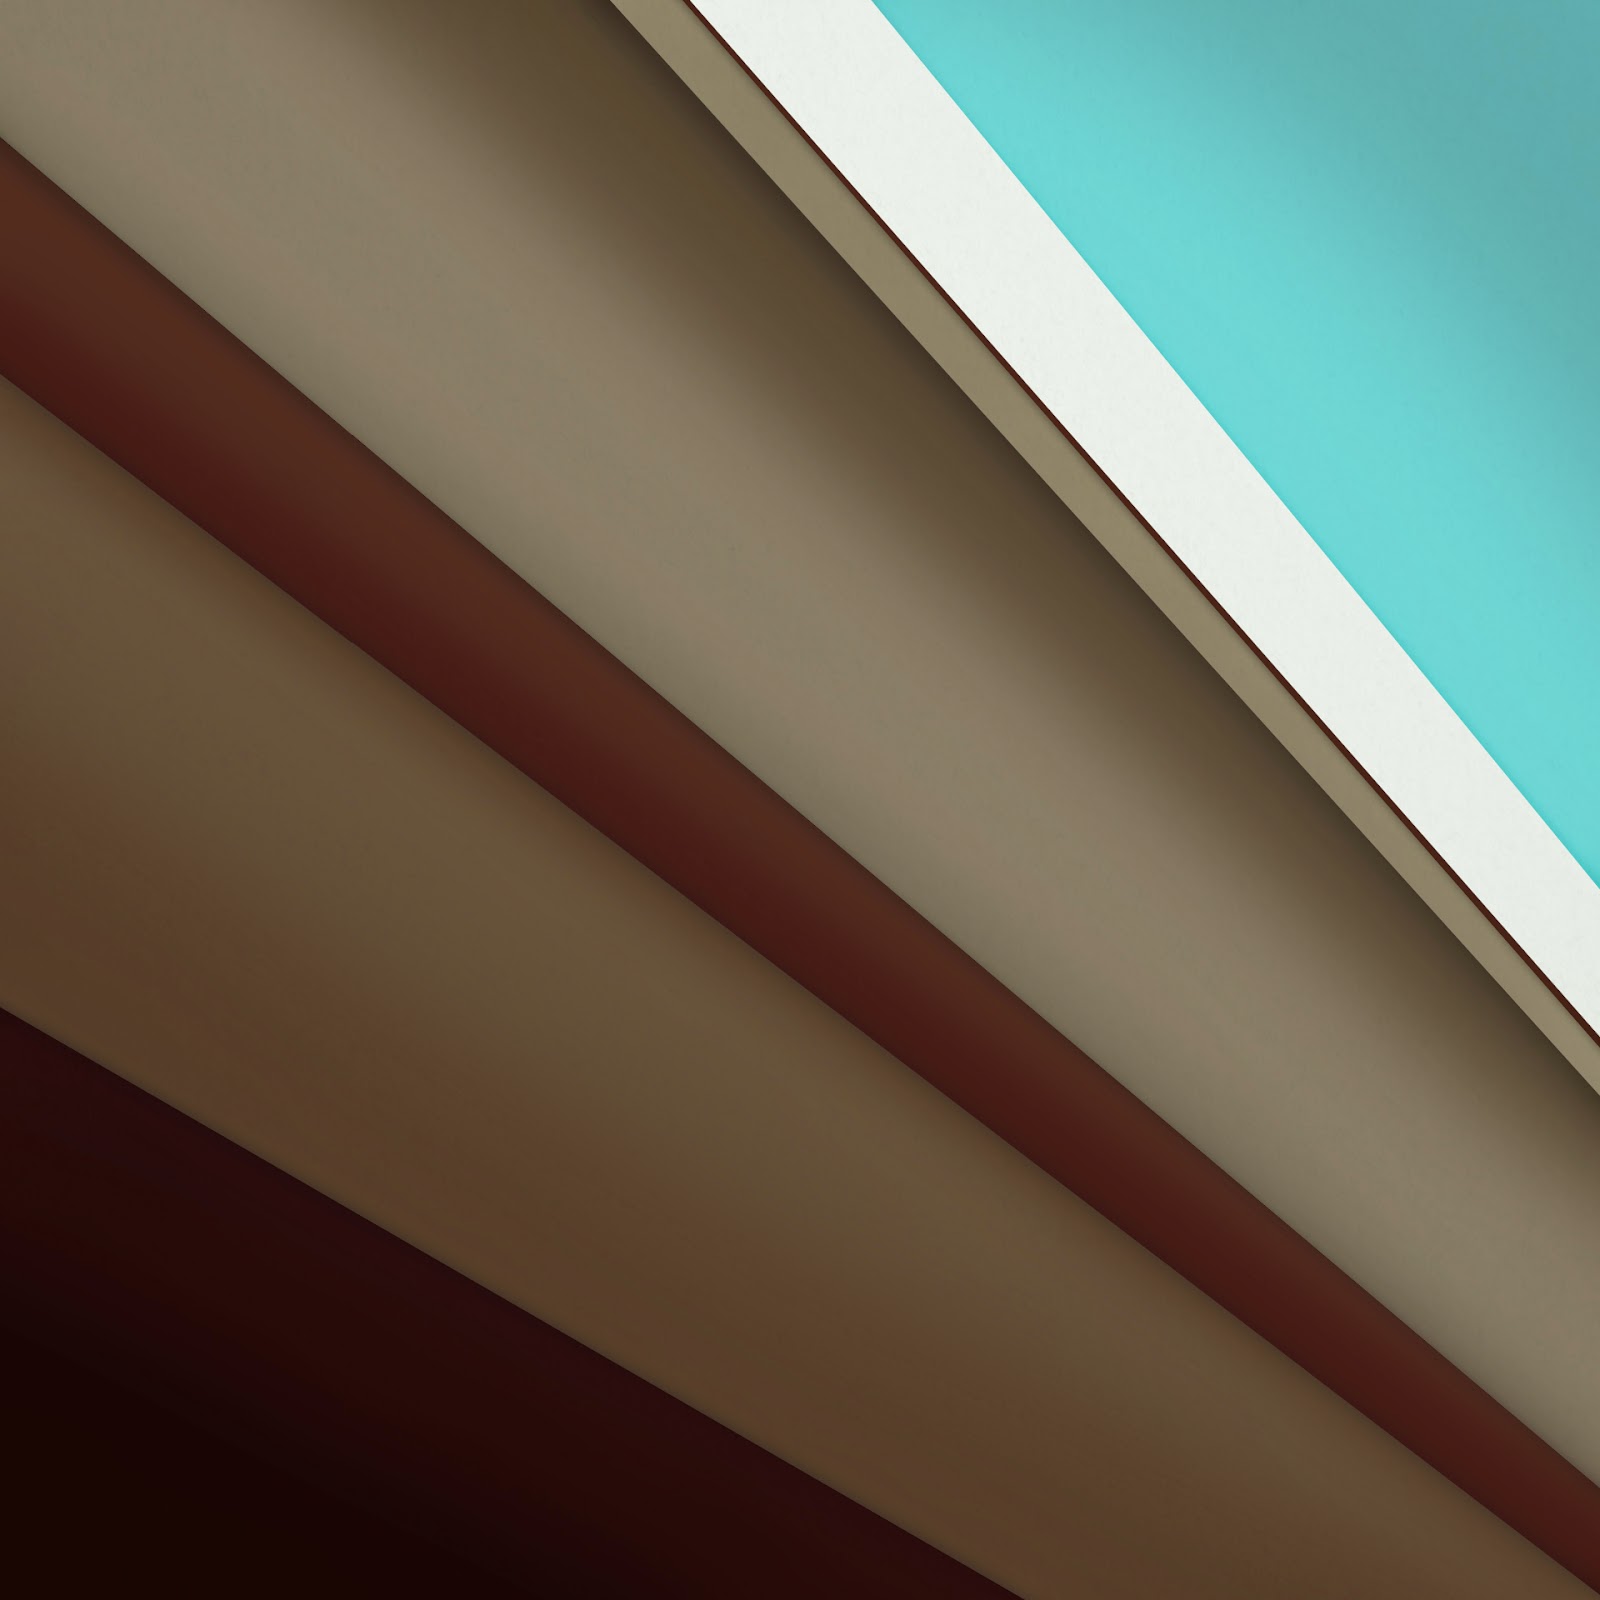 wallpaper warna coklat,line,ceiling,architecture,material property,wood